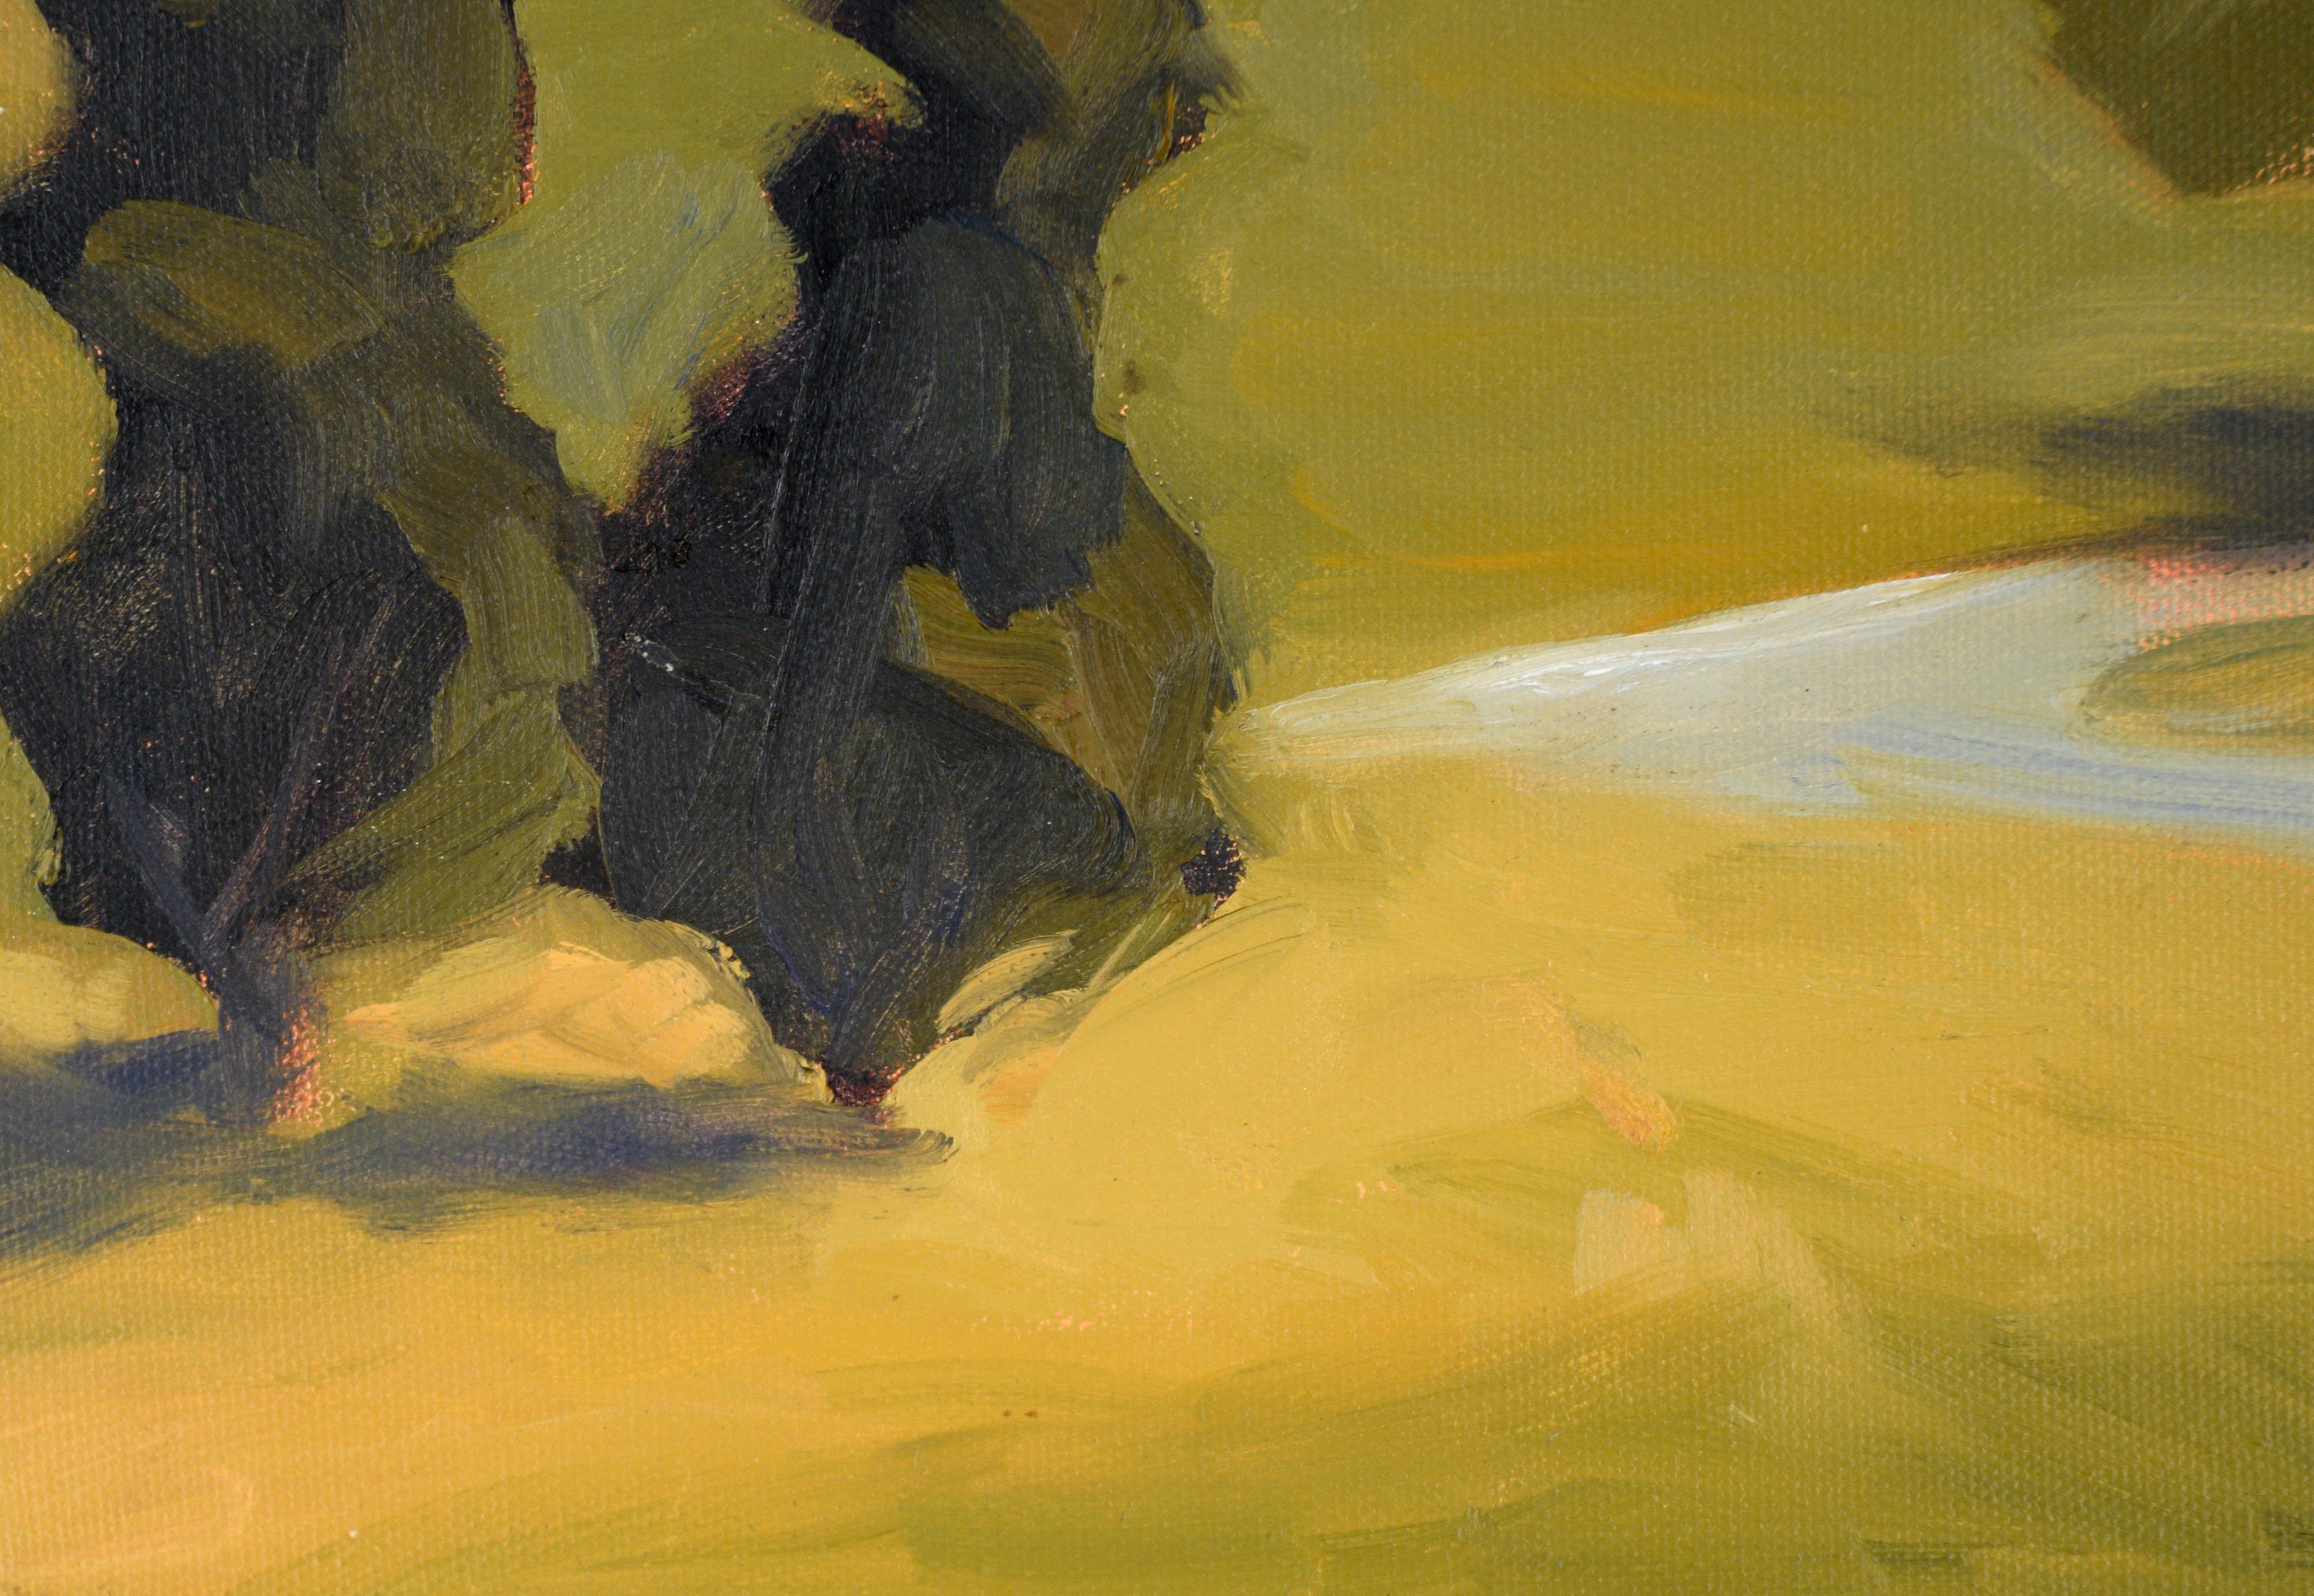 Olompali State Park, Marin County, CA - Plein Air Landscape in Oil on Canvas - Brown Landscape Painting by Mary Howard